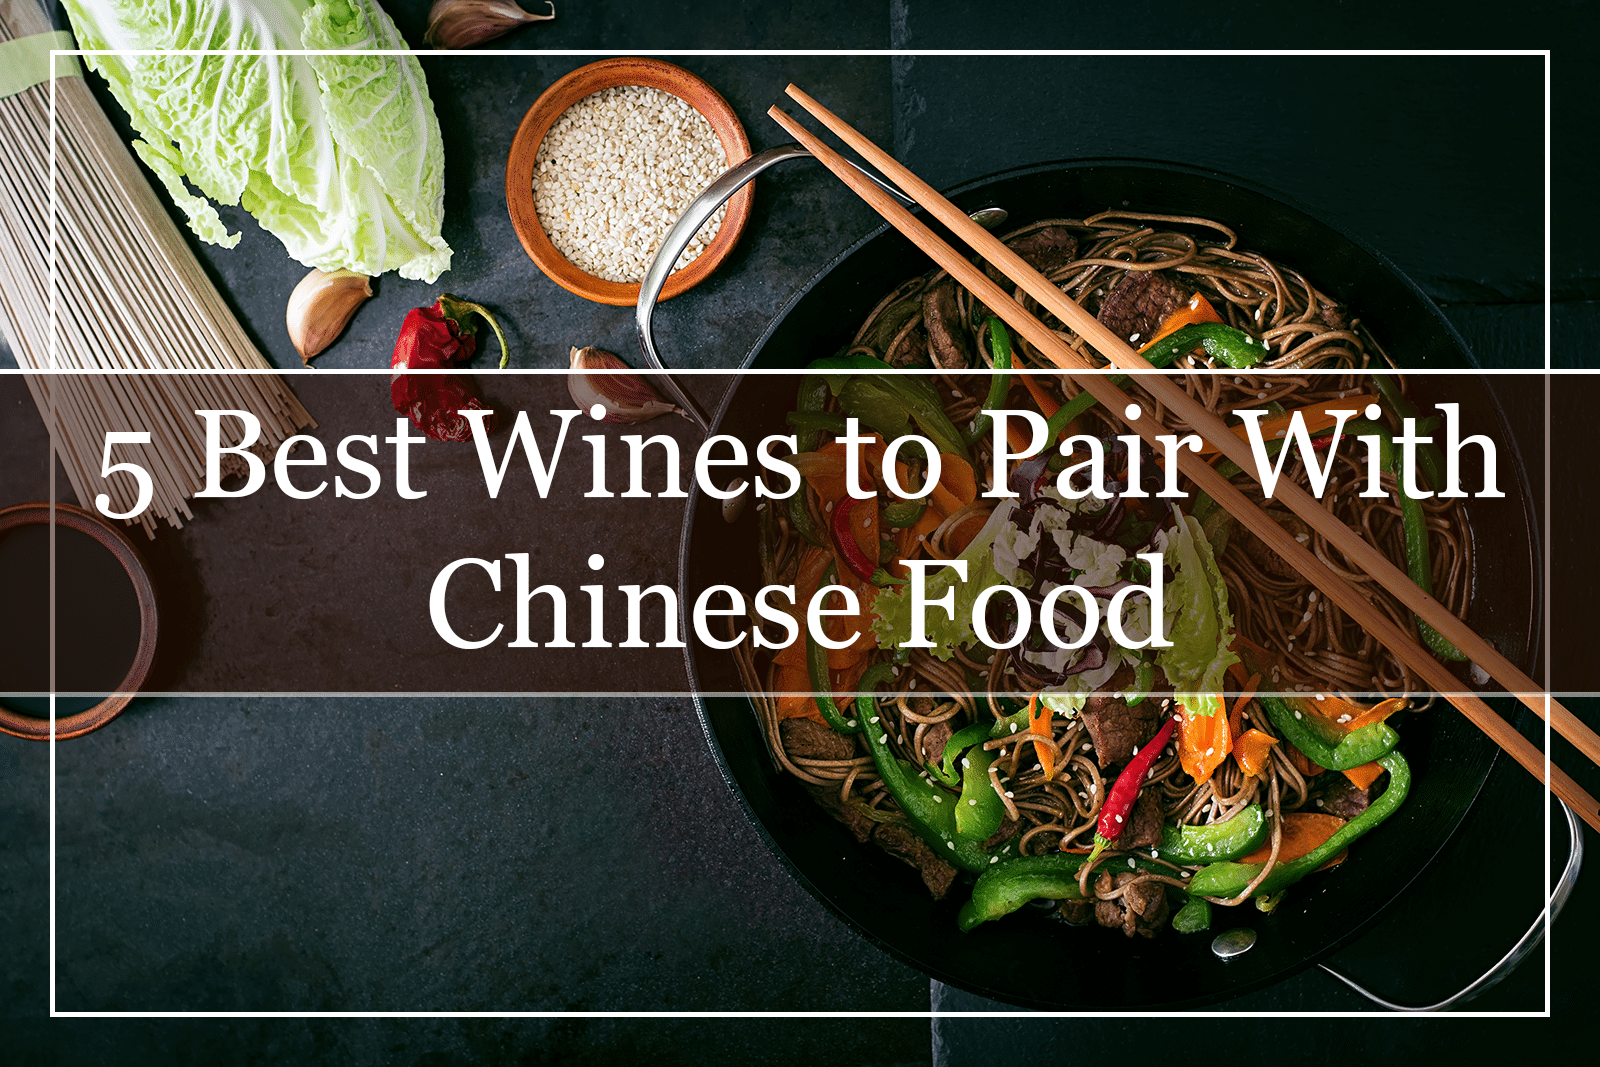 5 Best Wines to Pair With Chinese Food (2021)